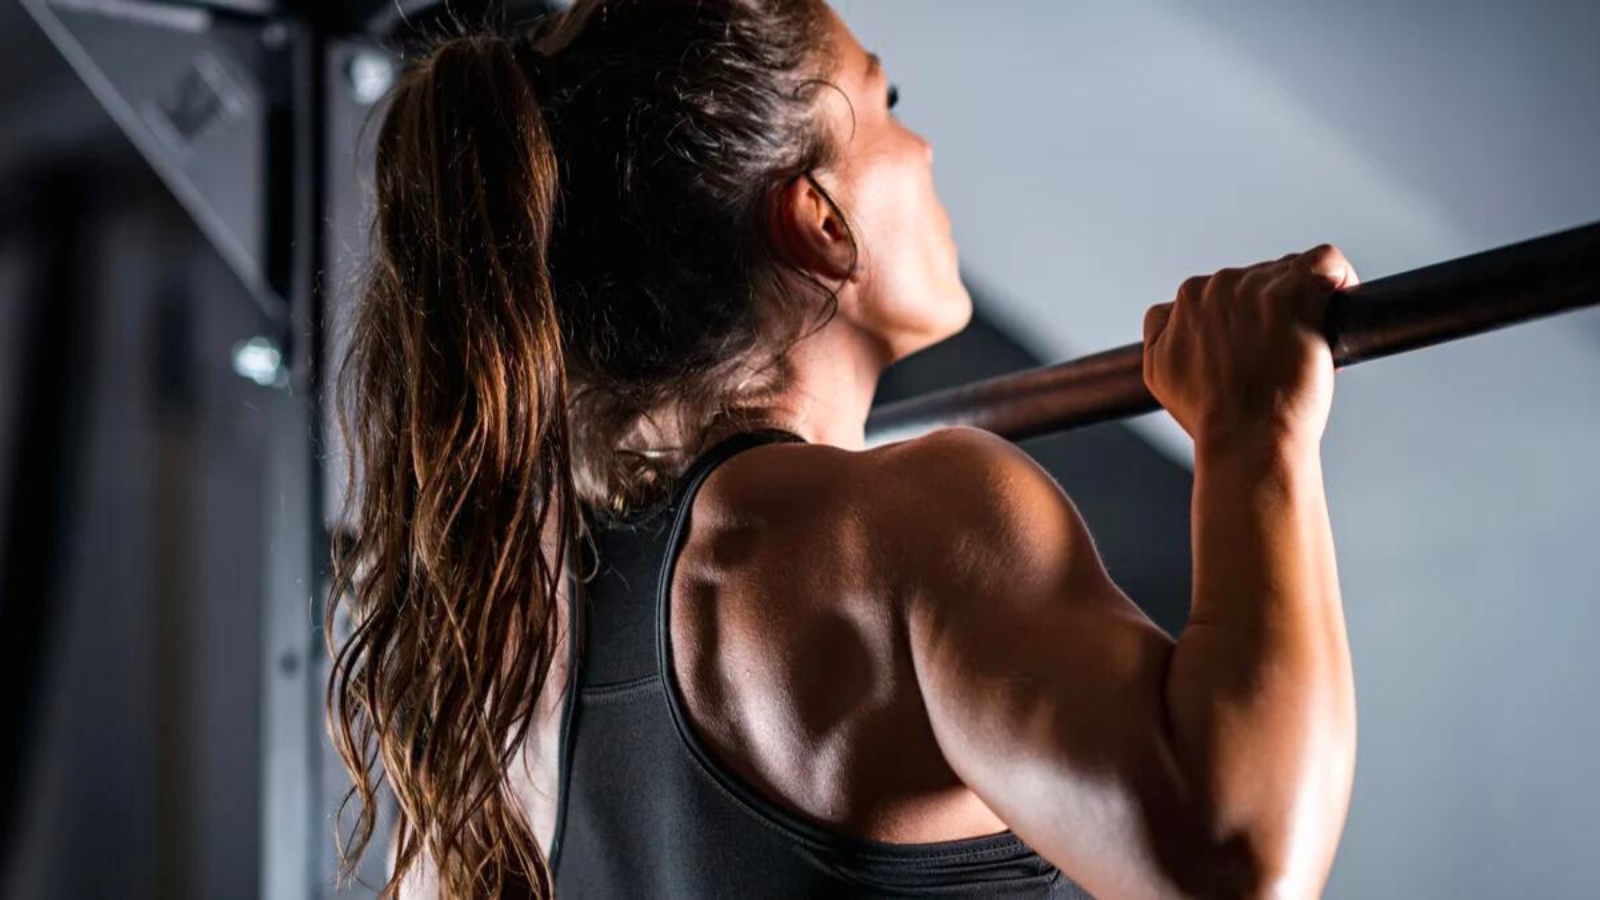 Master the Pull-Up for Back Muscle, Strength, and Full-Body